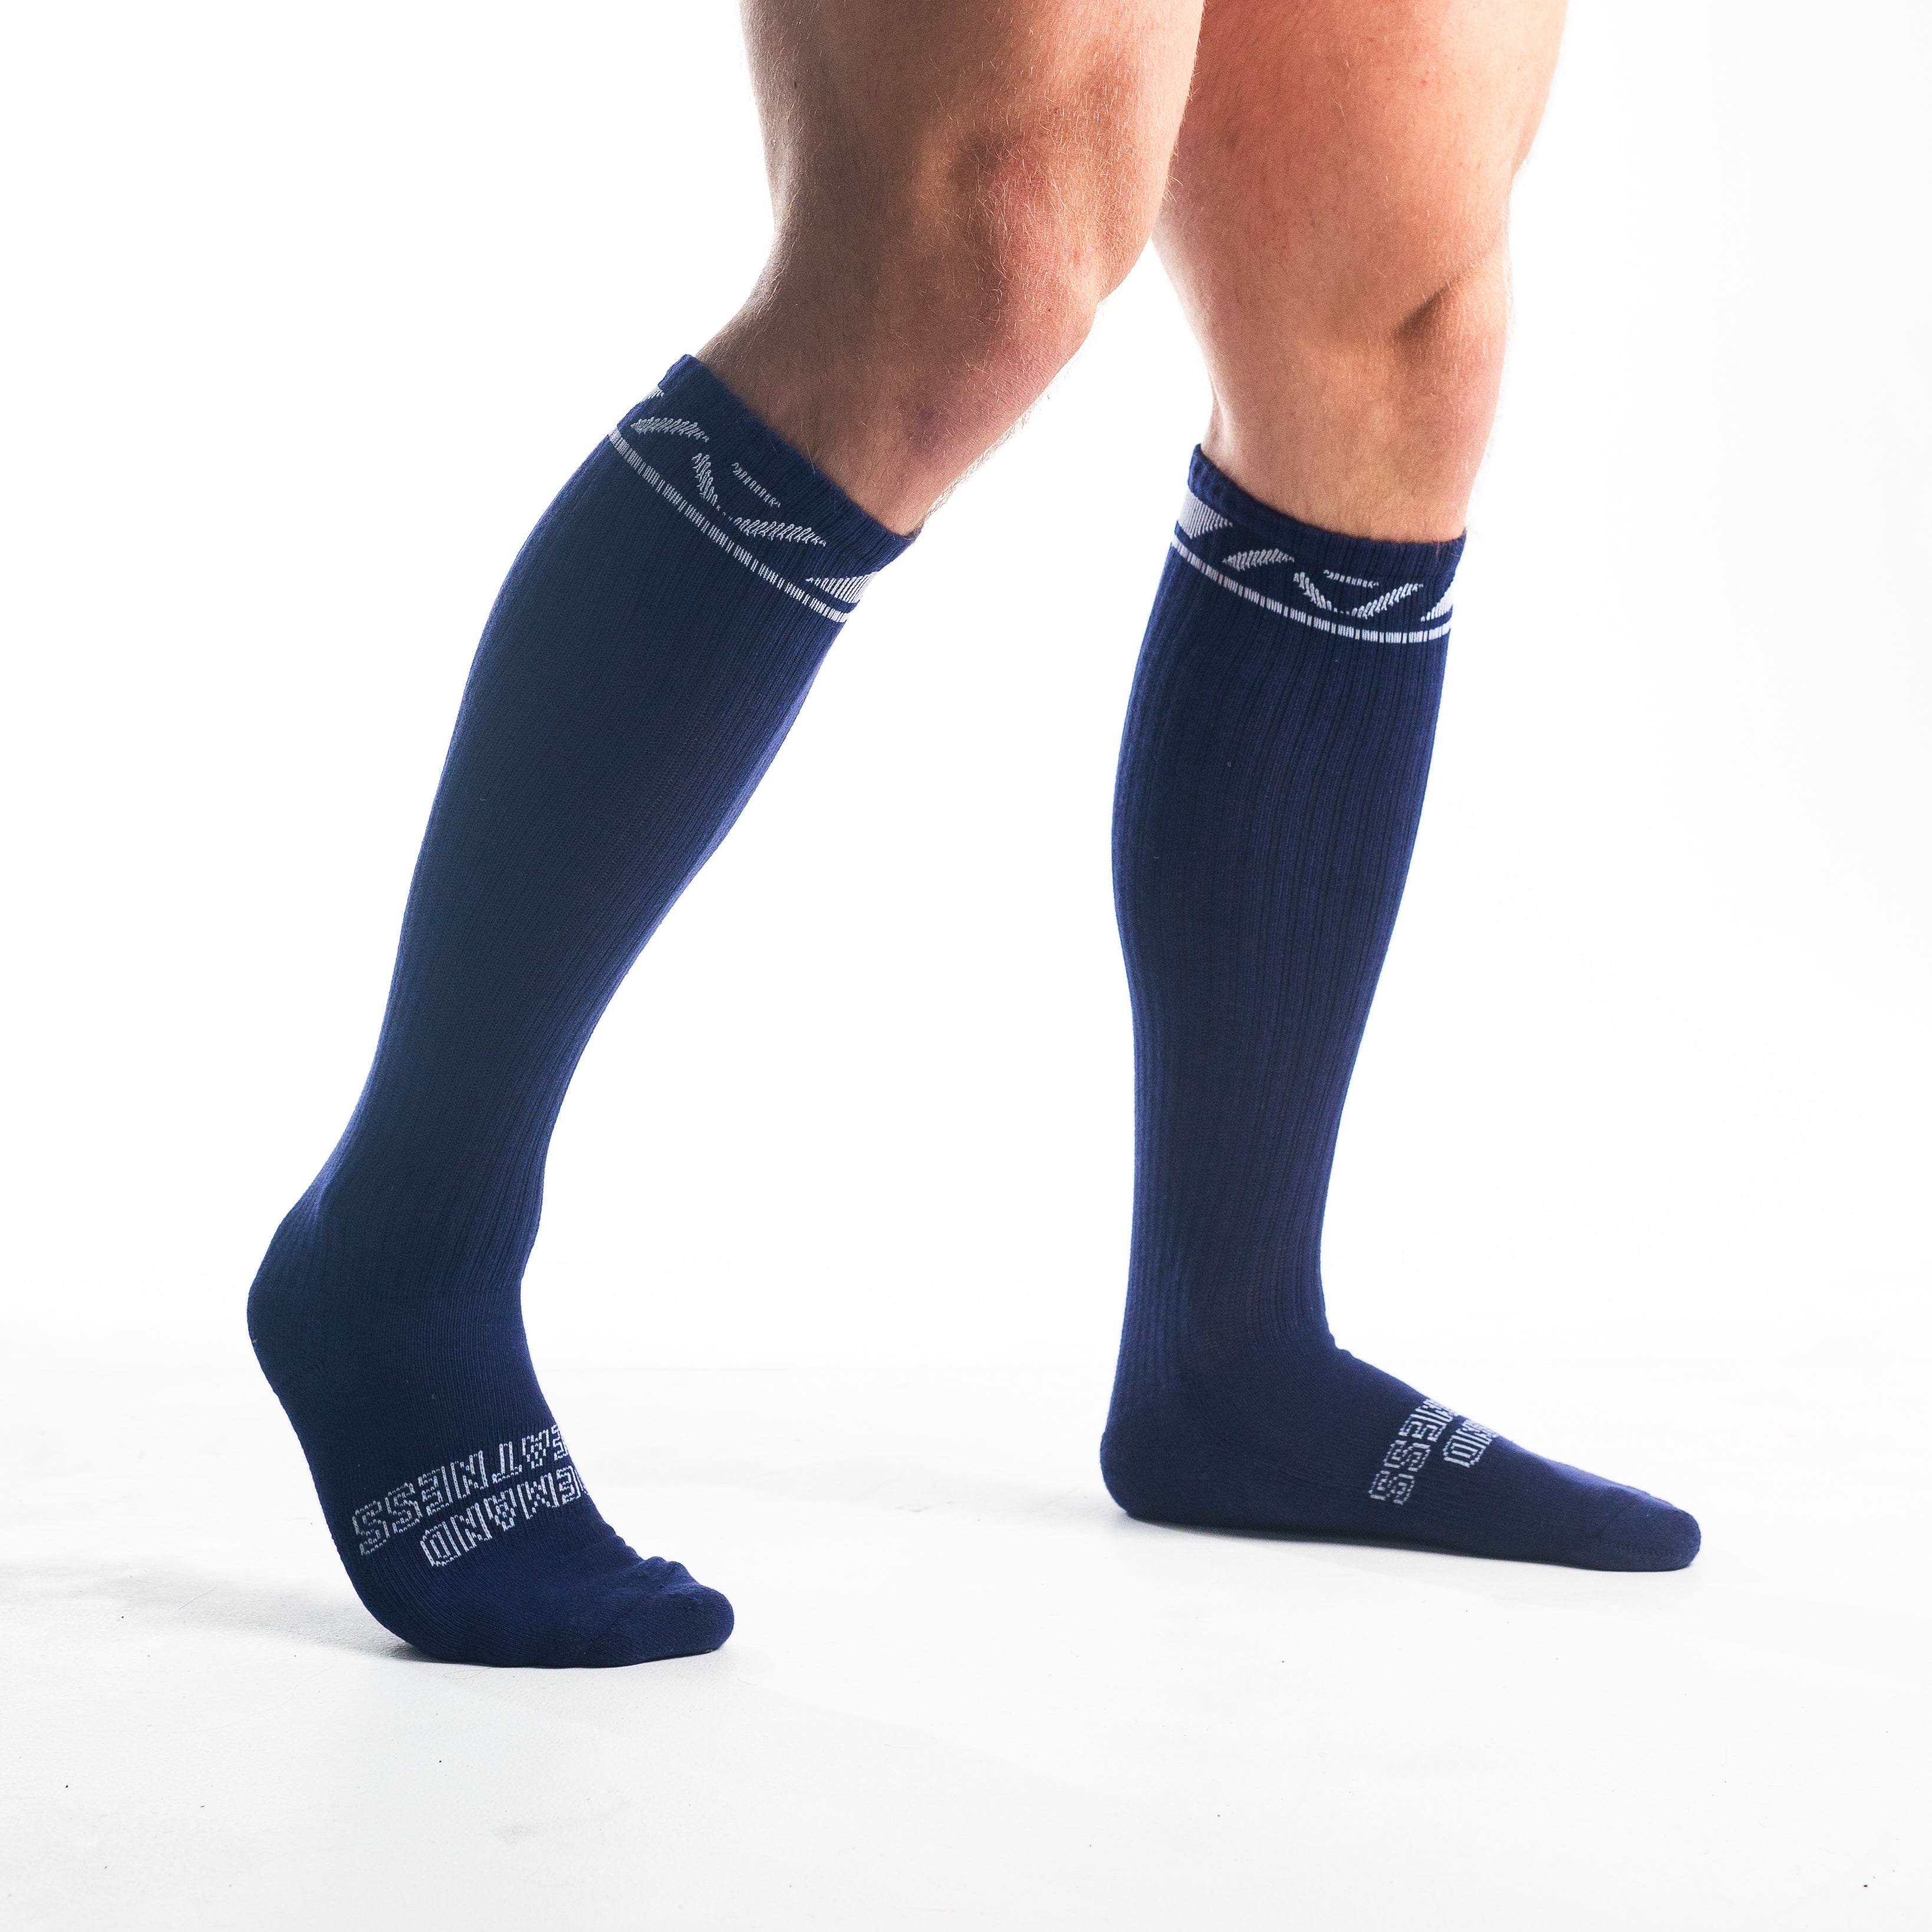 A7 Night Light Deadlift socks are designed specifically for pulls and keep your shins protected from scrapes. A7 deadlift socks are a perfect pair to wear in training or powerlifting competition. The IPF Approved Kit includes Powerlifting Singlet, A7 Meet Shirt, A7 Zebra Wrist Wraps, A7 Deadlift Socks, Hourglass Knee Sleeves (Stiff Knee Sleeves and Rigor Mortis Knee Sleeves). Genouillères powerlifting shipping to France, Spain, Ireland, Germany, Italy, Sweden and EU.